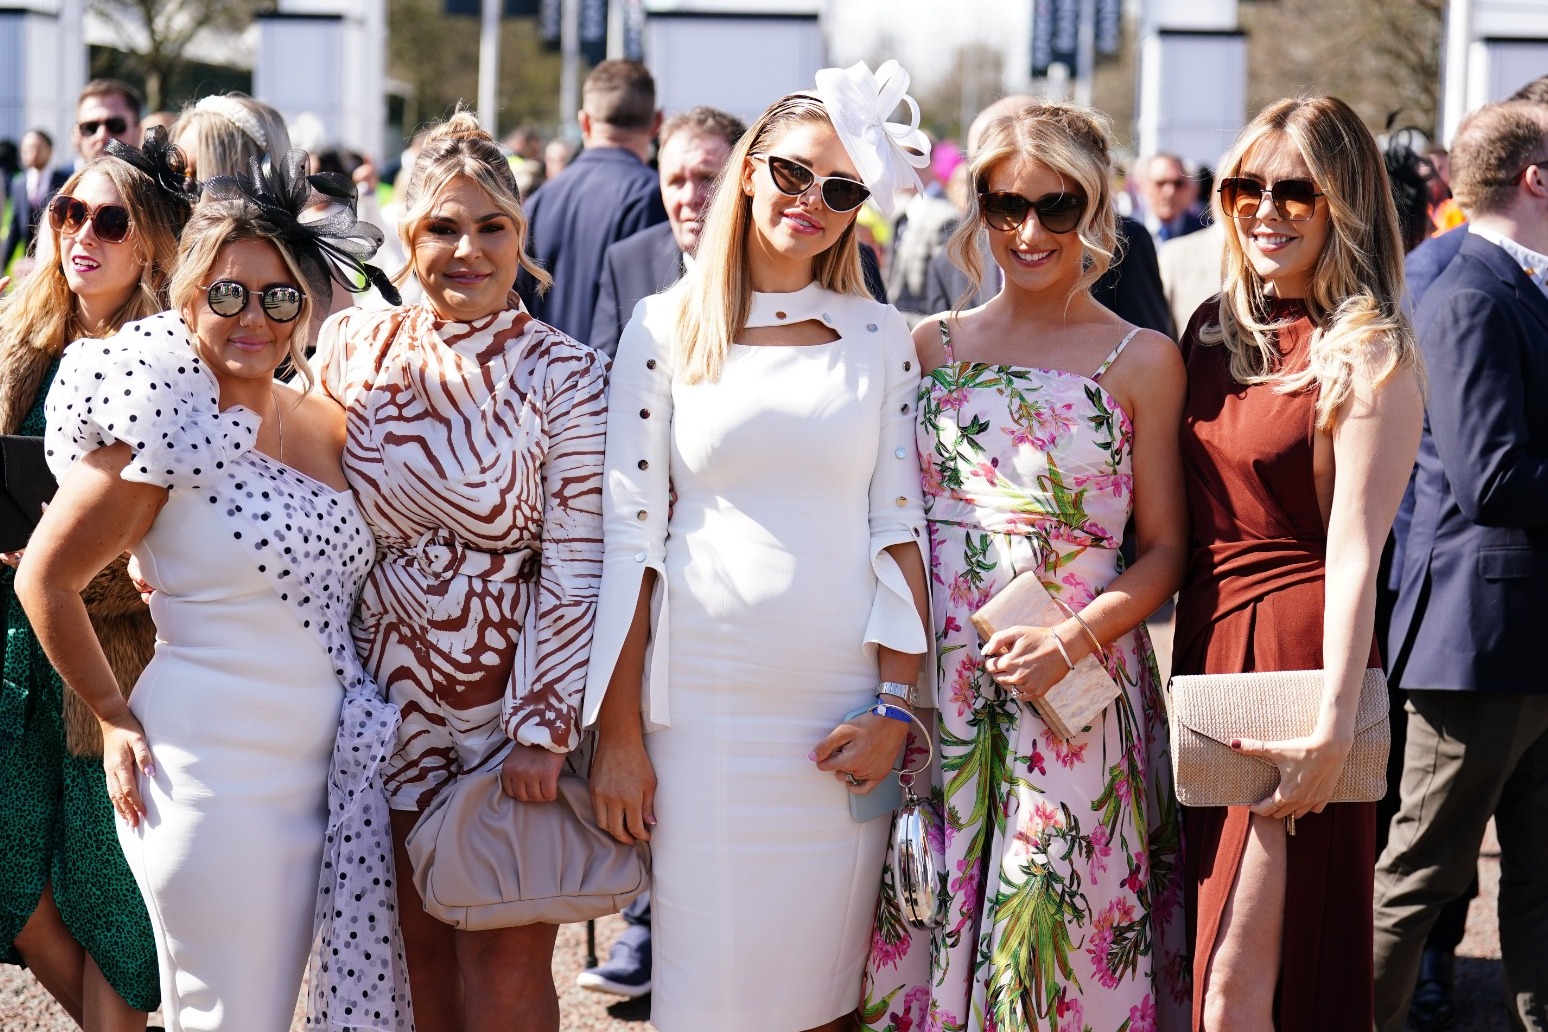 Excited and emotional racegoers return to Aintree for Ladies Day 